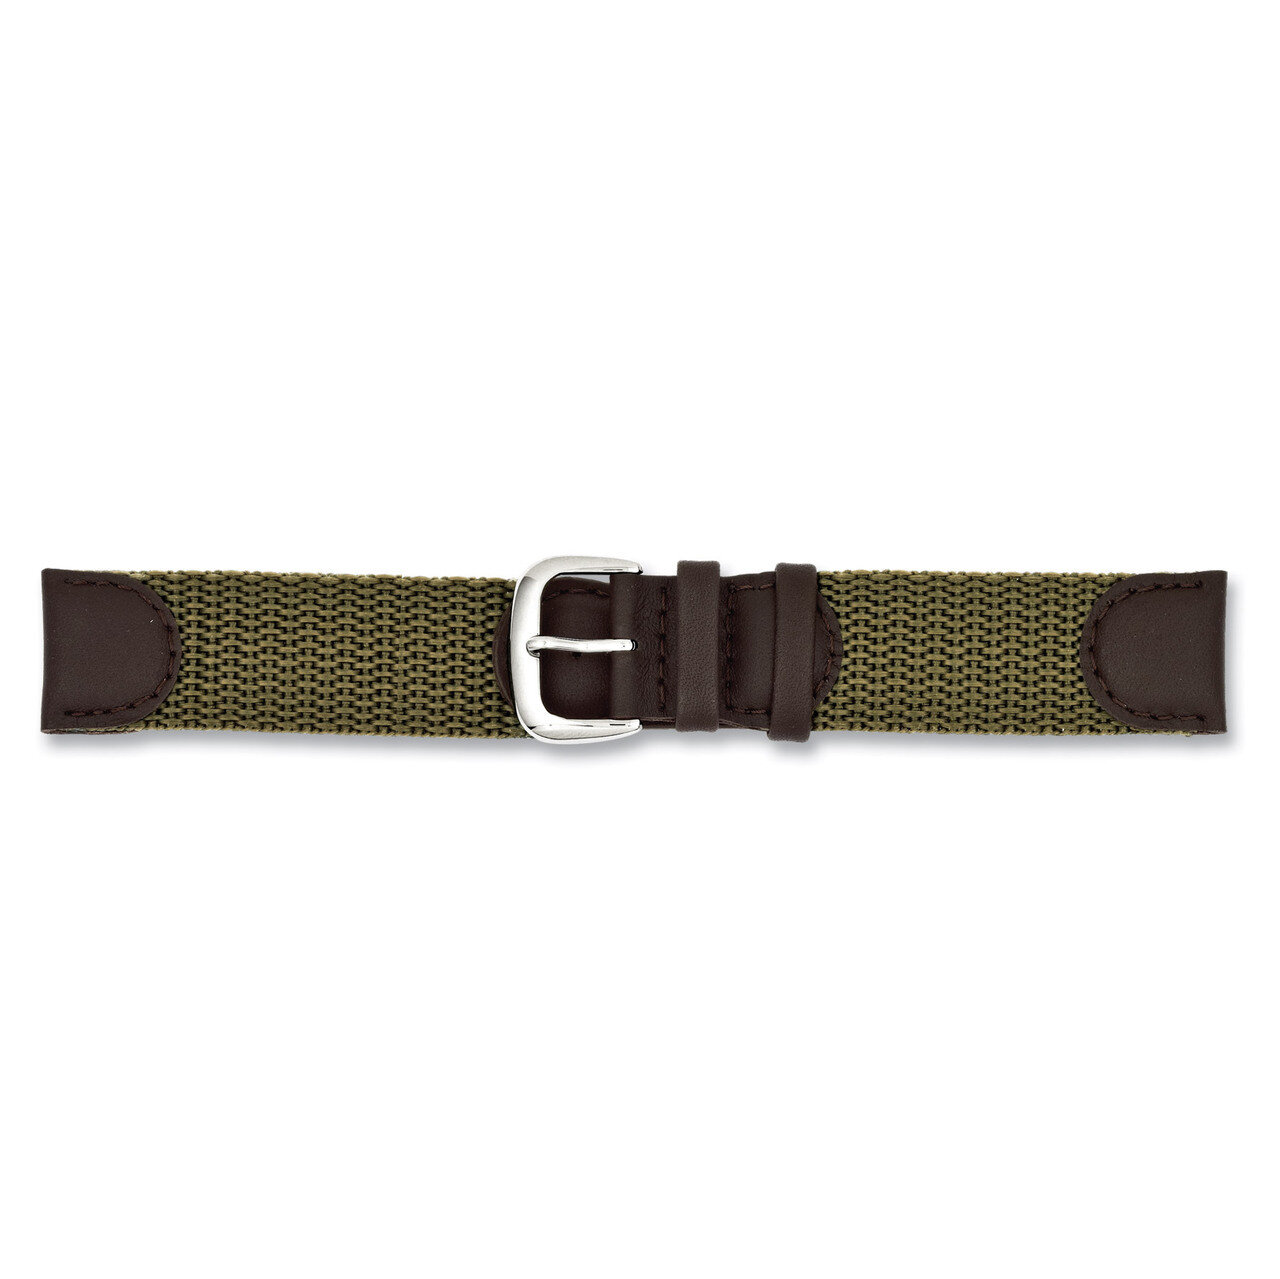 16mm Olive Army Style Nylon Leather Watch Band 7.5 Inch Silver-tone Buckle BA301-16